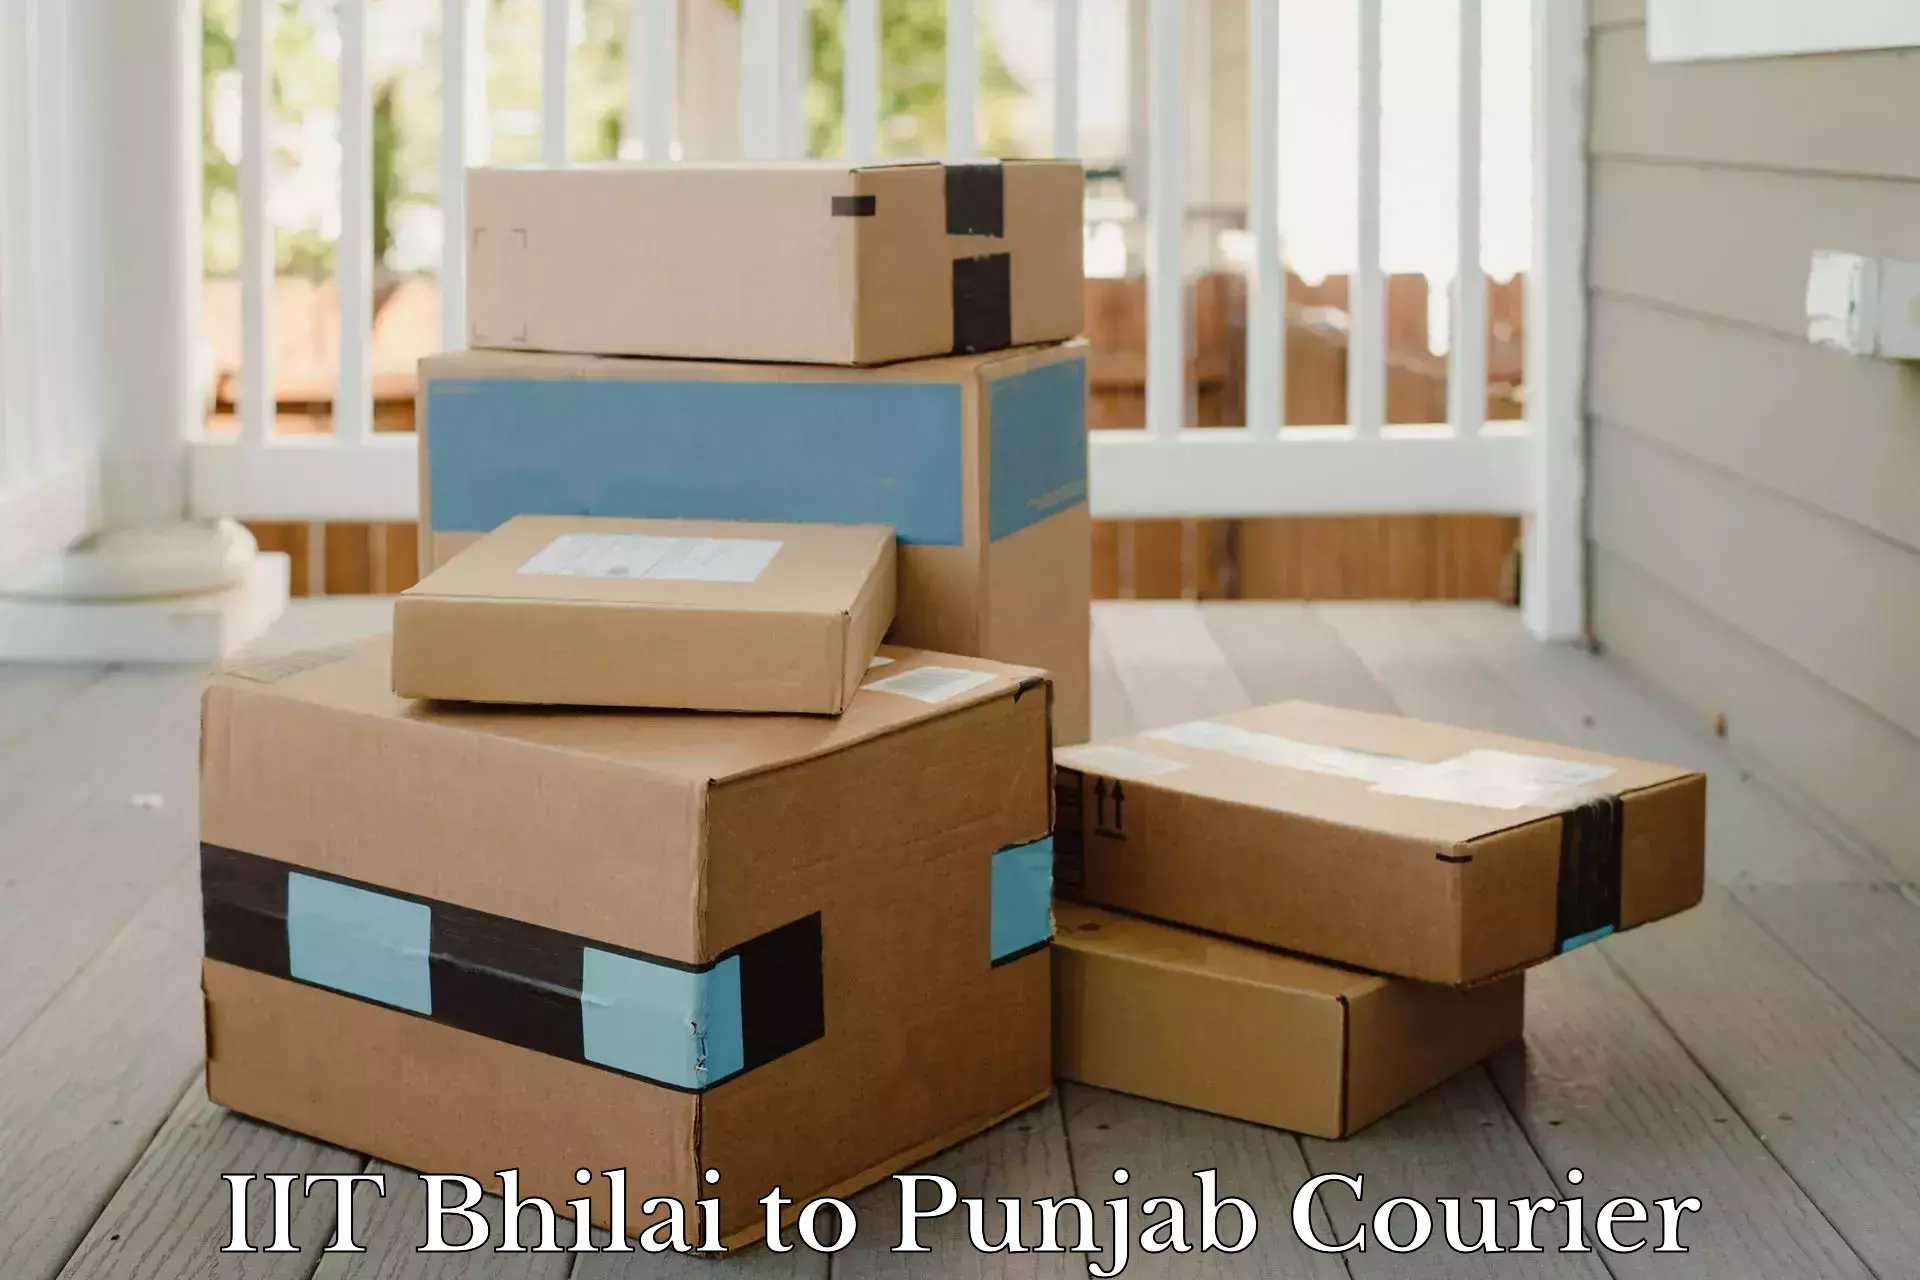 Business delivery service IIT Bhilai to Amritsar